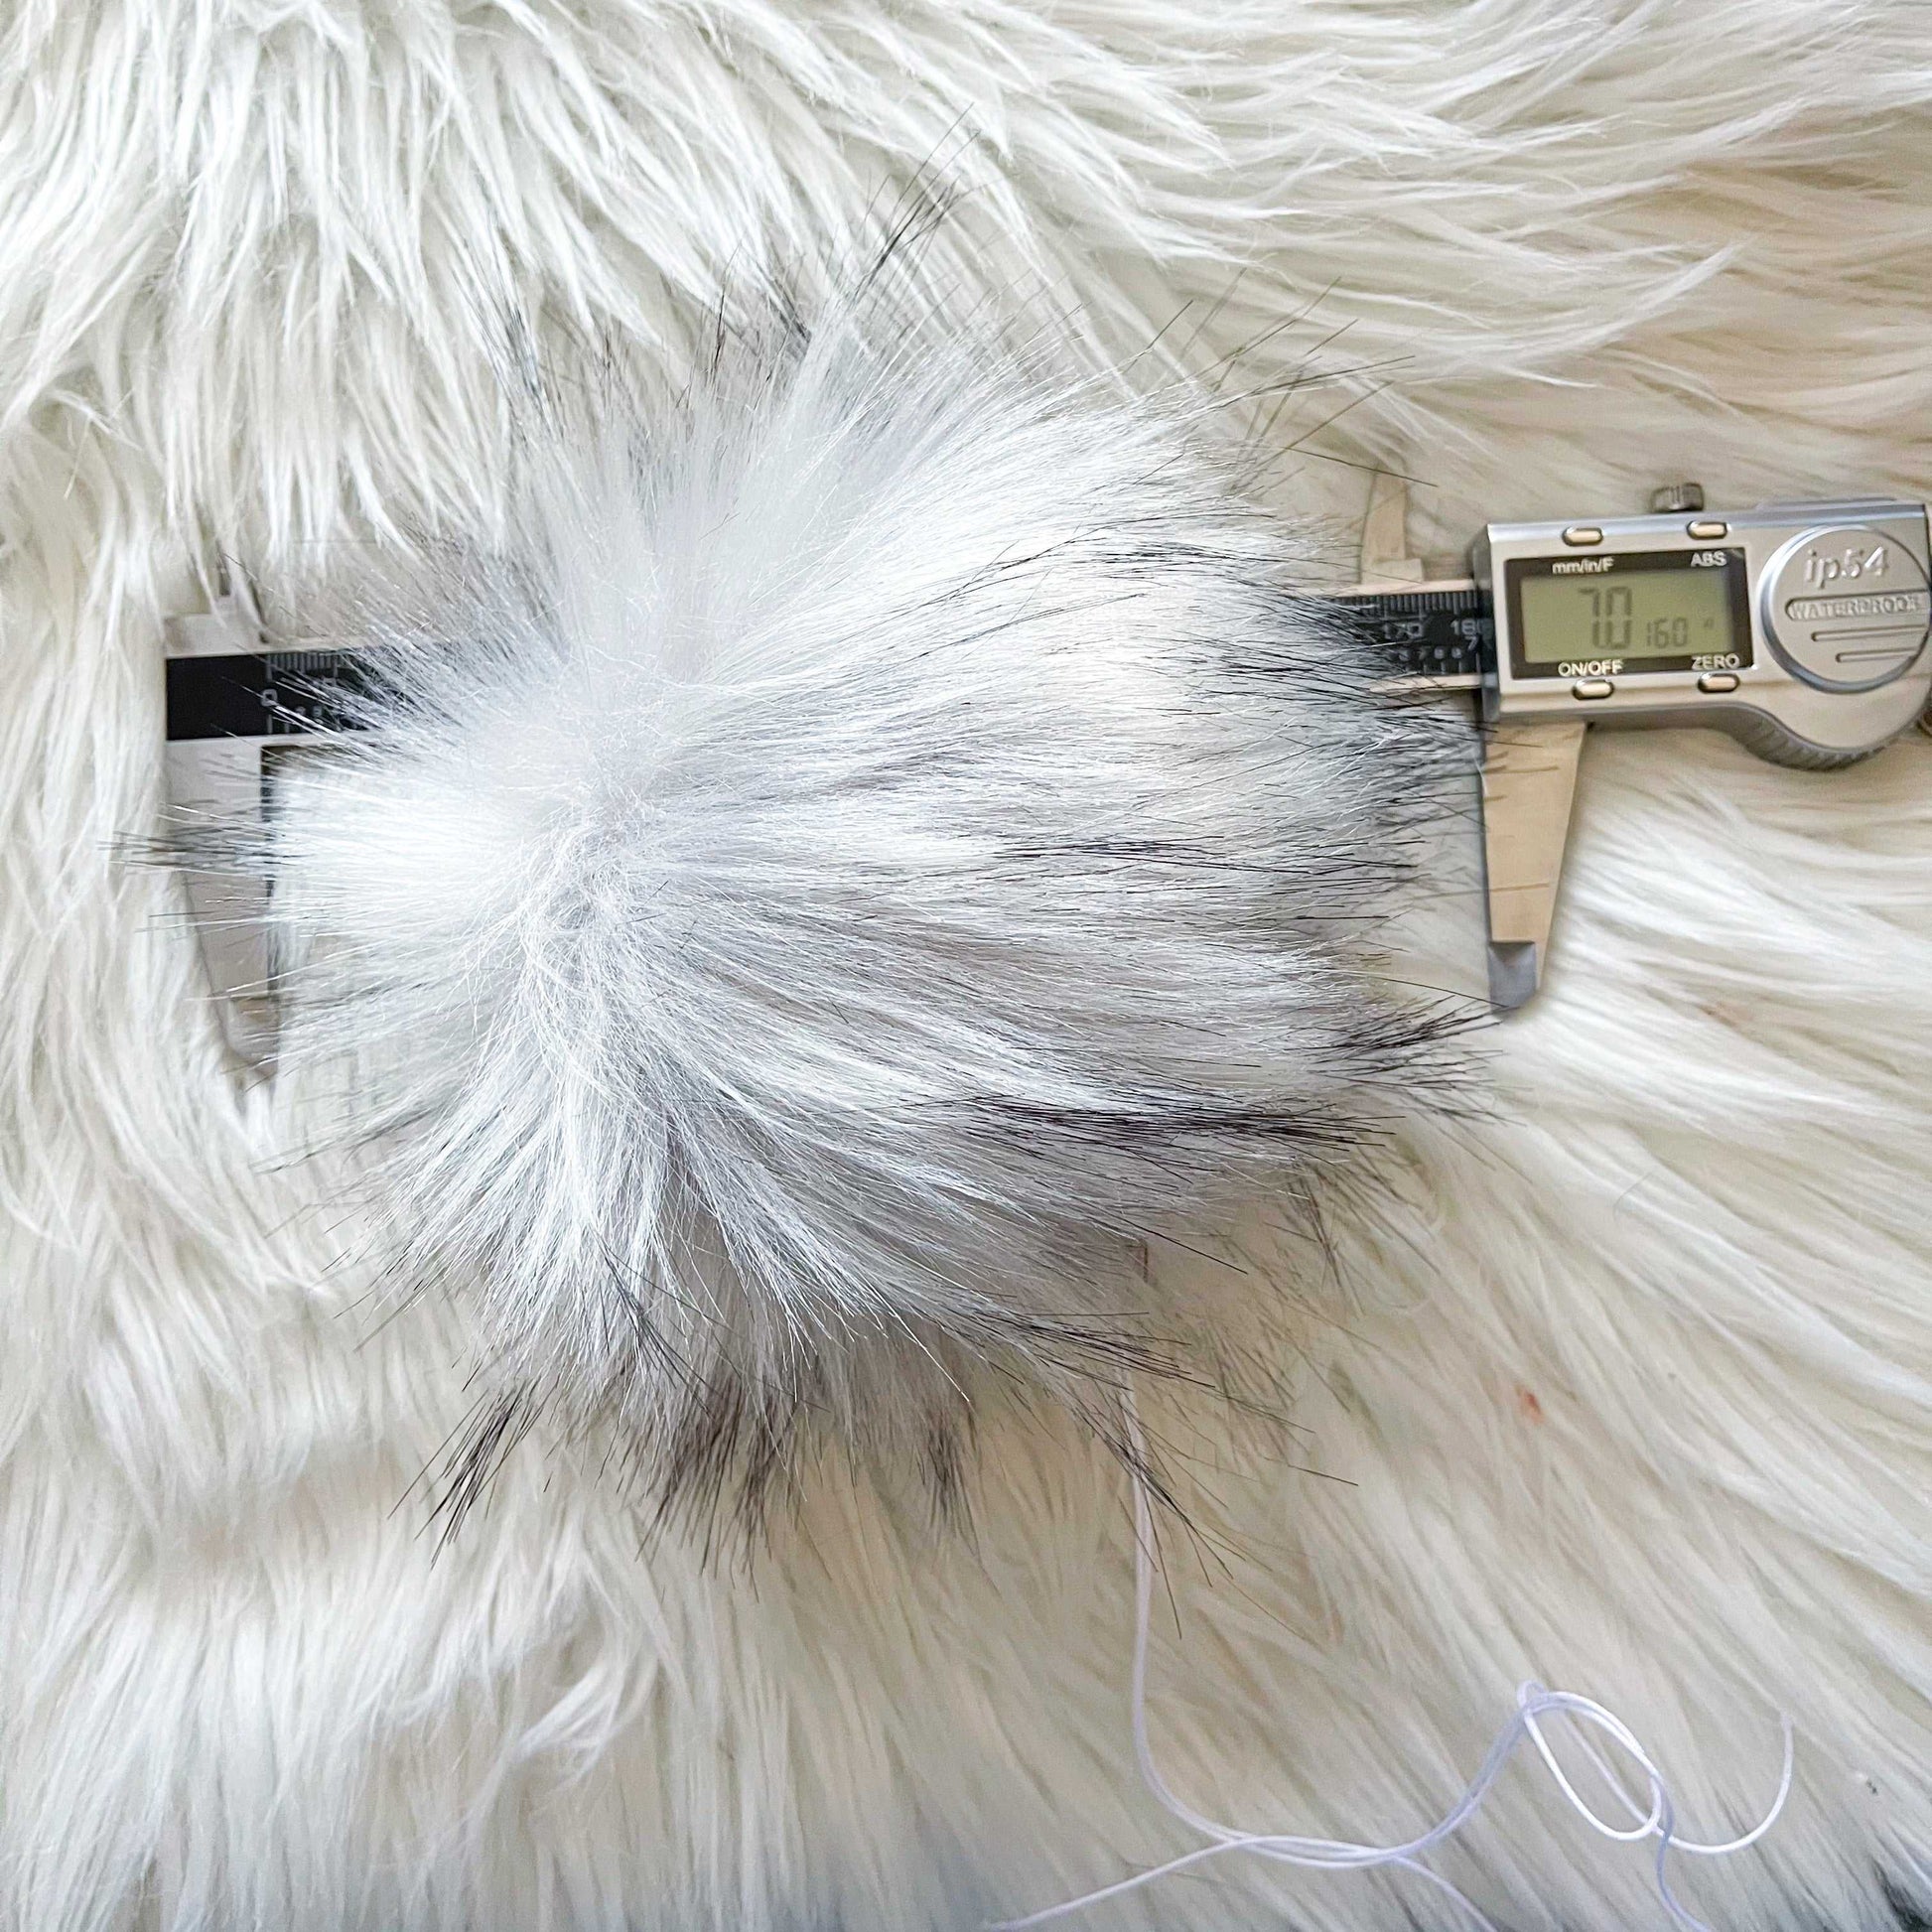 Grey Wolf Luxury Faux Fur Pompom | Pom pom with Ties, Buttons or Snaps Pom Poms 5 $ Buttons & Beans Co.